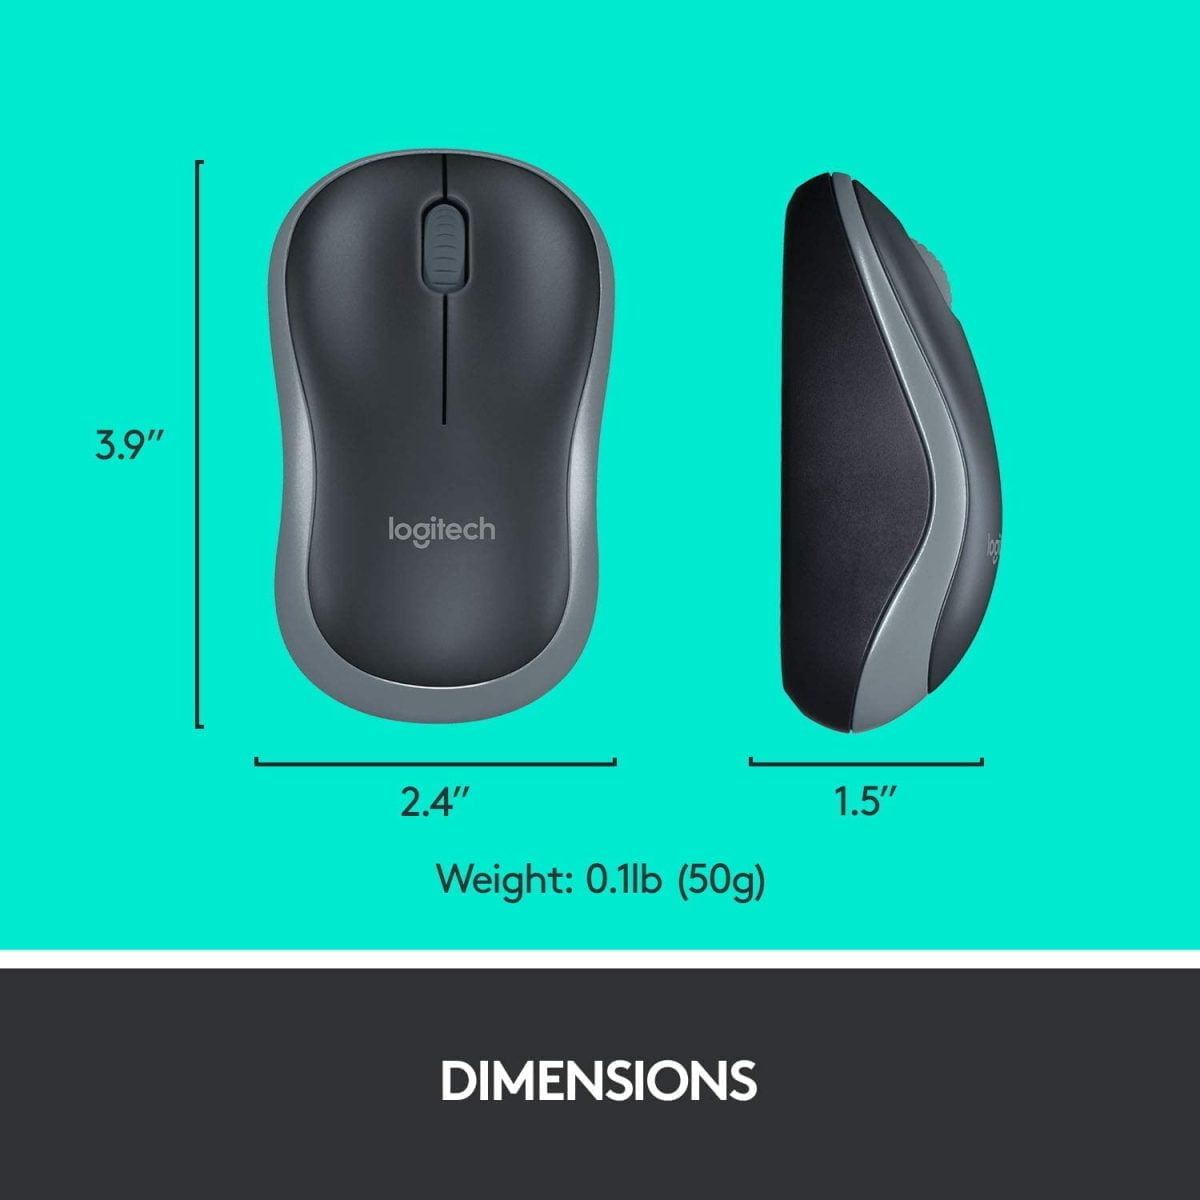 61Sdlqymhbl. Ac Sl1500 لوجيتك Https://Www.youtube.com/Watch?V=Hhwya1Rlfts 4 Ghz Wireless Connection: A Tiny Logitech Unifying Receiver Connects Both The Keyboard And Mouse Using Just One Usb Port
Long Battery Life: Get Up To 24 Months Of Keyboard Power And 12 Months Of Mouse Power Without Changing Batteries (Keyboard And Mouse Battery Life May Vary Based On User And Computing Conditions)
No Software Installation Required لوجيتك – كومبو لاسلكي Mk270 مع لوحة مفاتيح وماوس – أسود